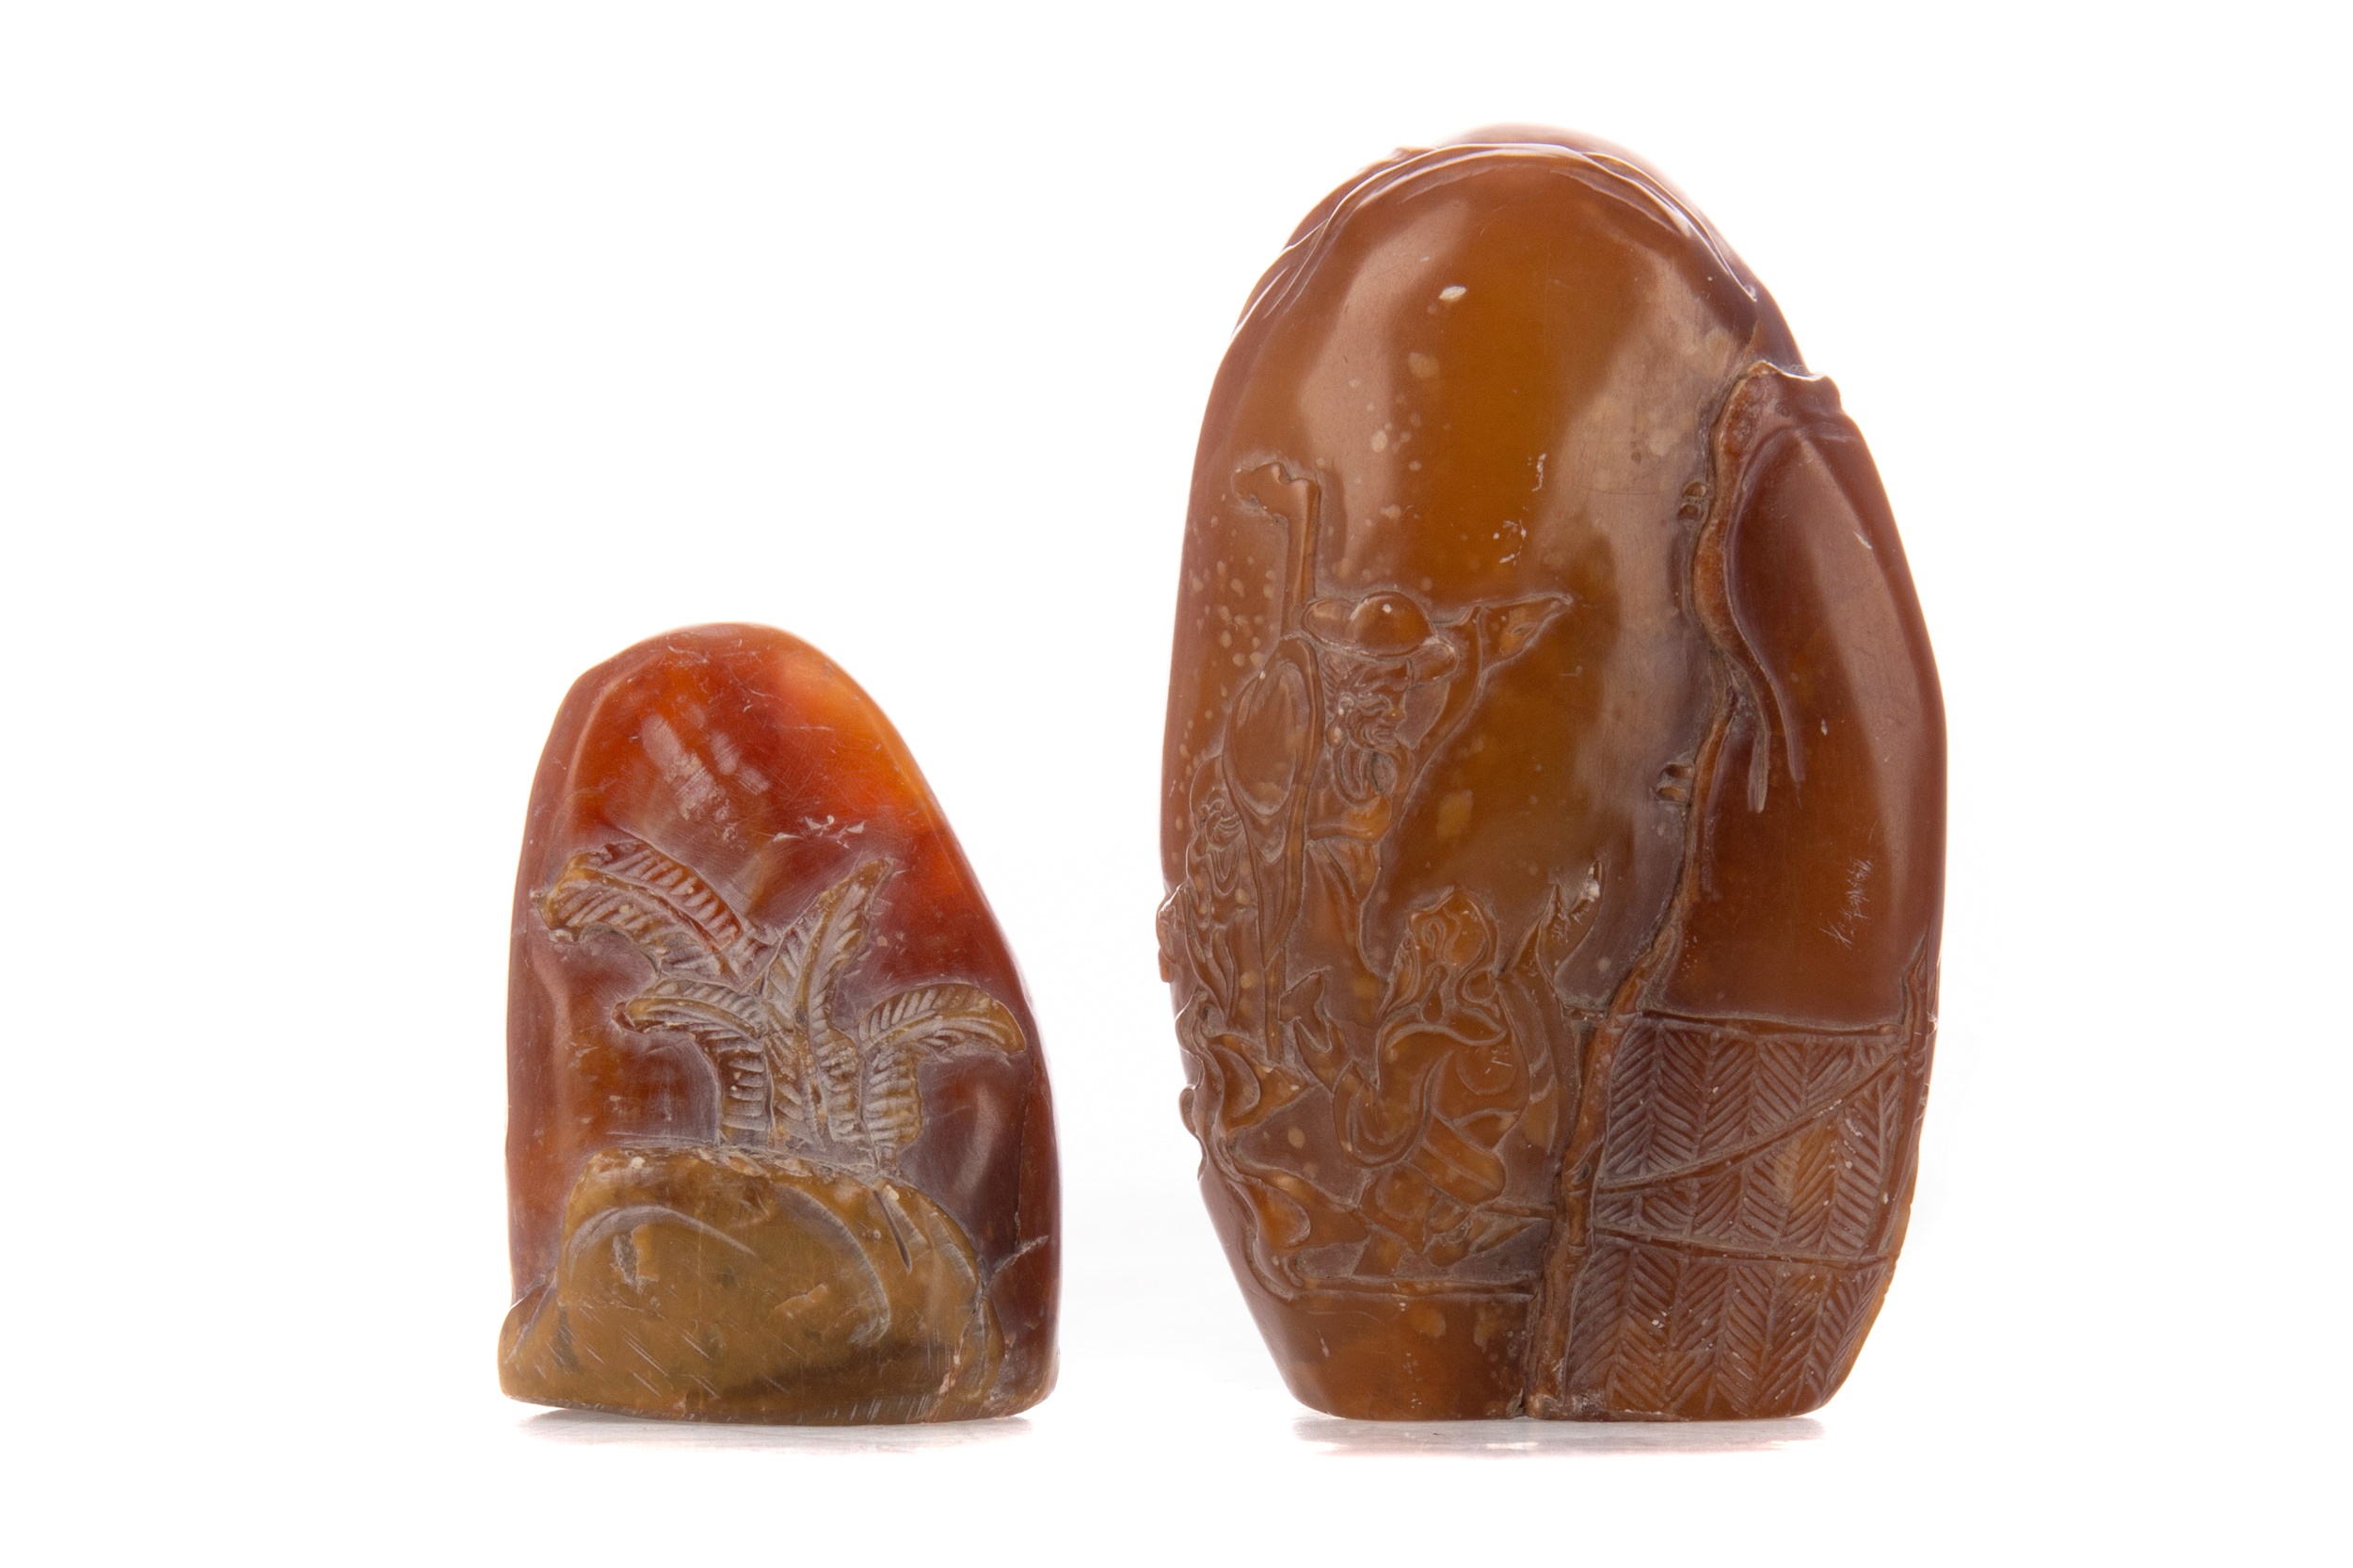 TWO CHINESE SCHOLAR'S CARVED SHAO SHAN STONES